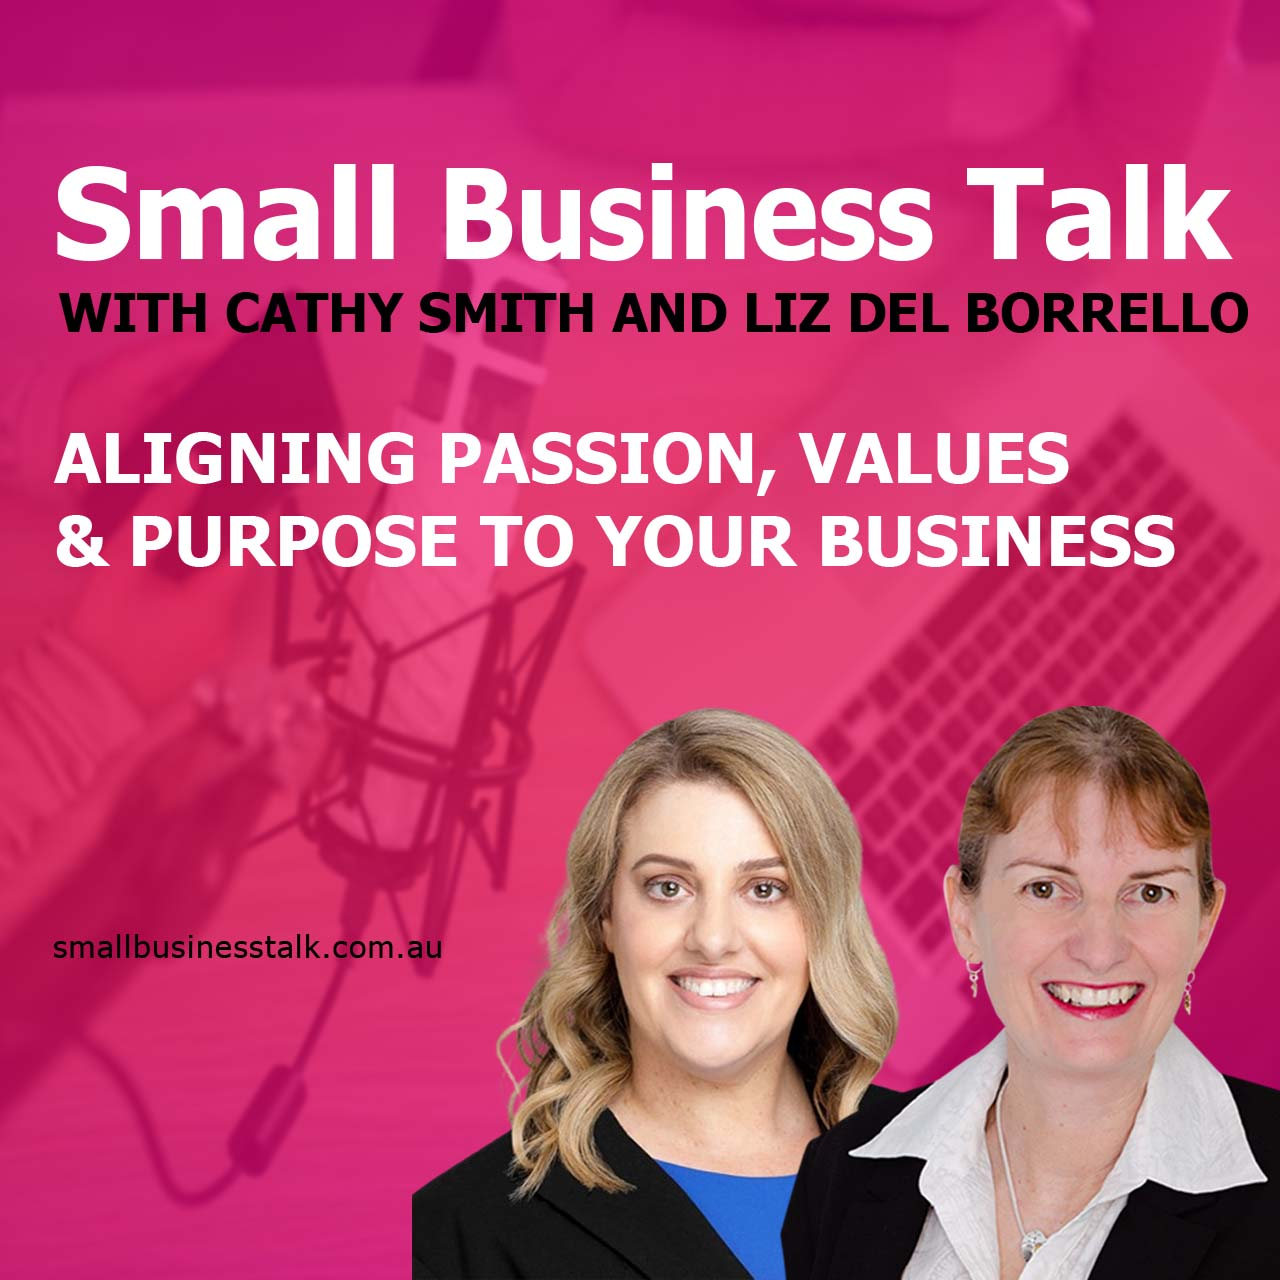 Again, Aligning Passion Values & Purpose to Your Business.